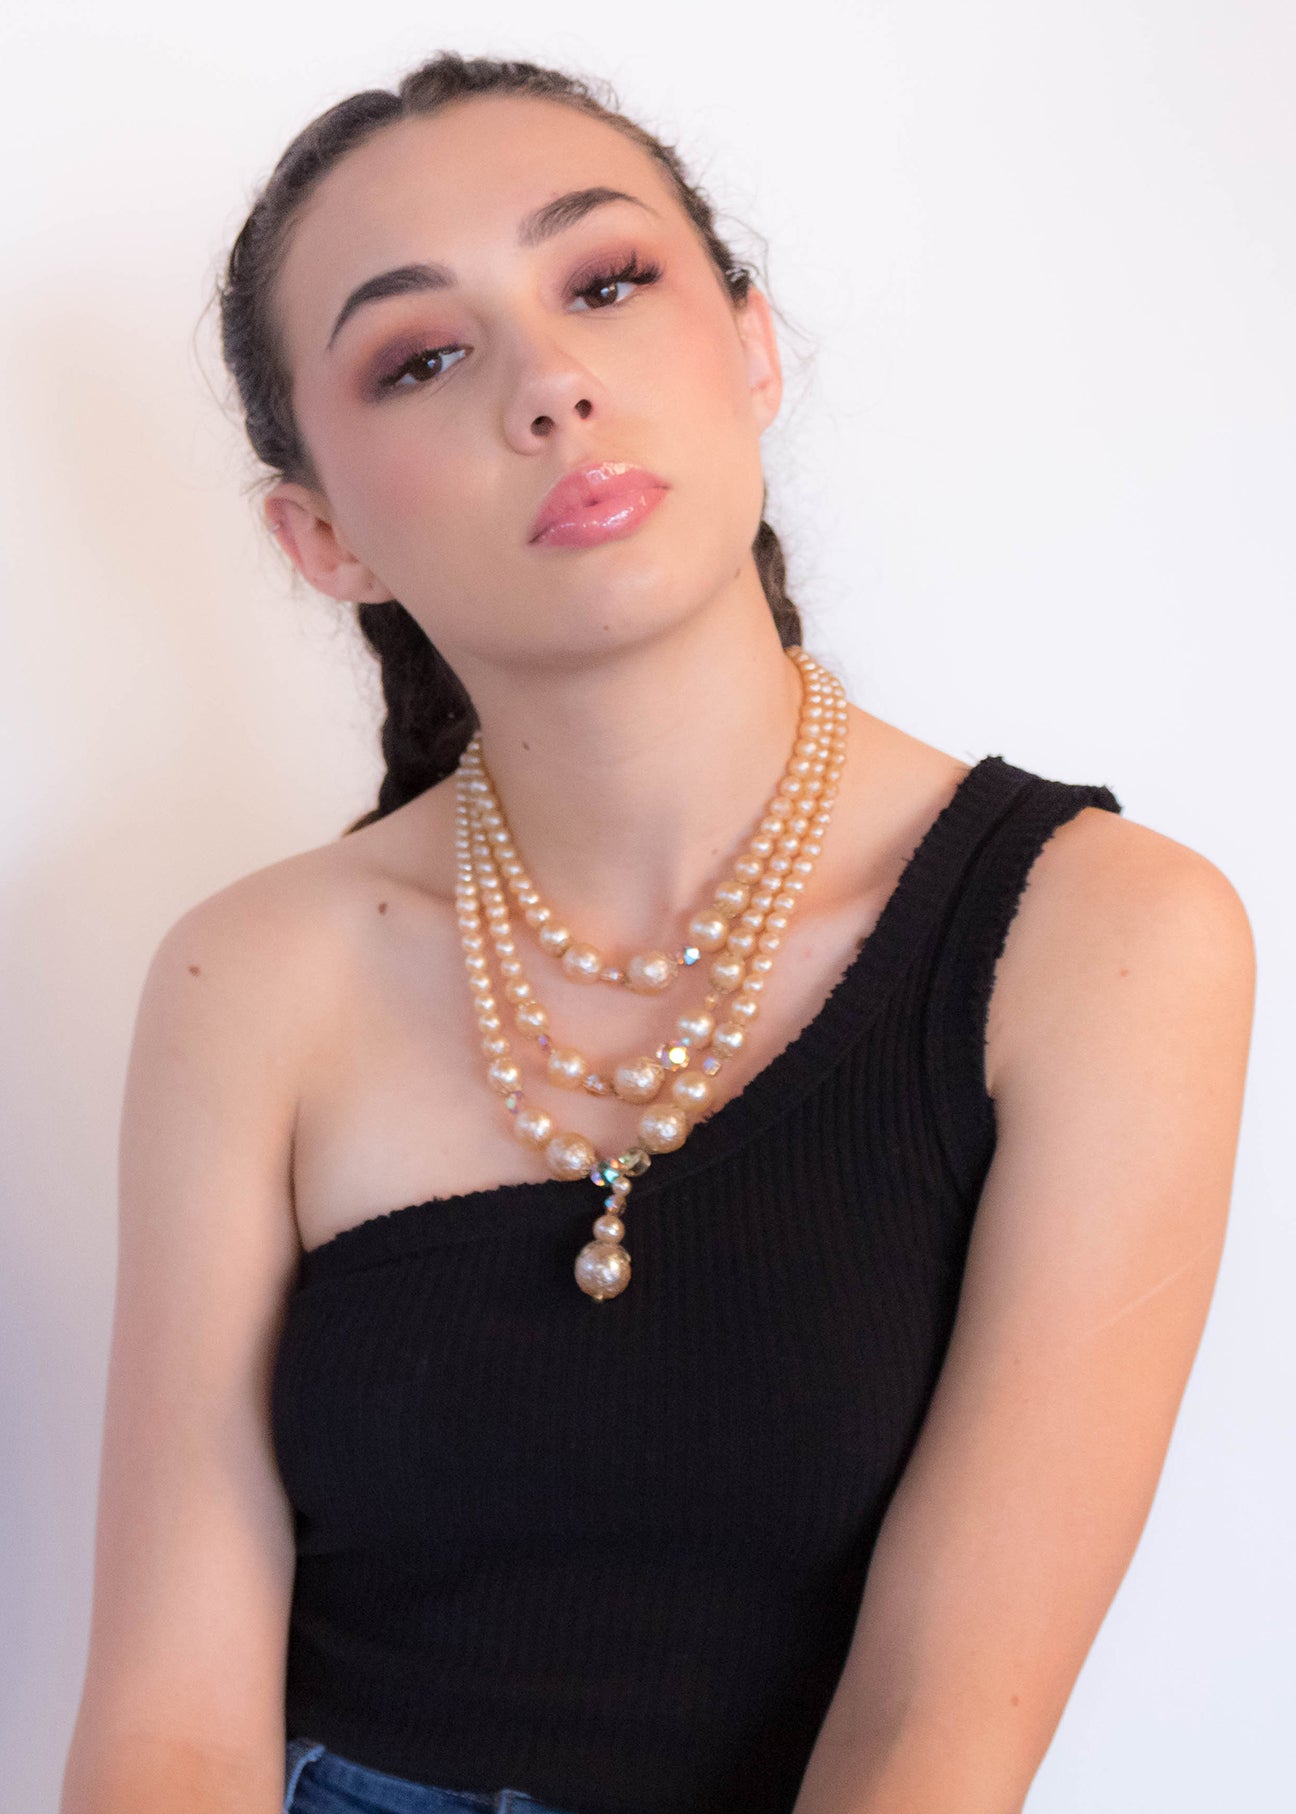 60s Rose-Gold Faux Pearl Necklace